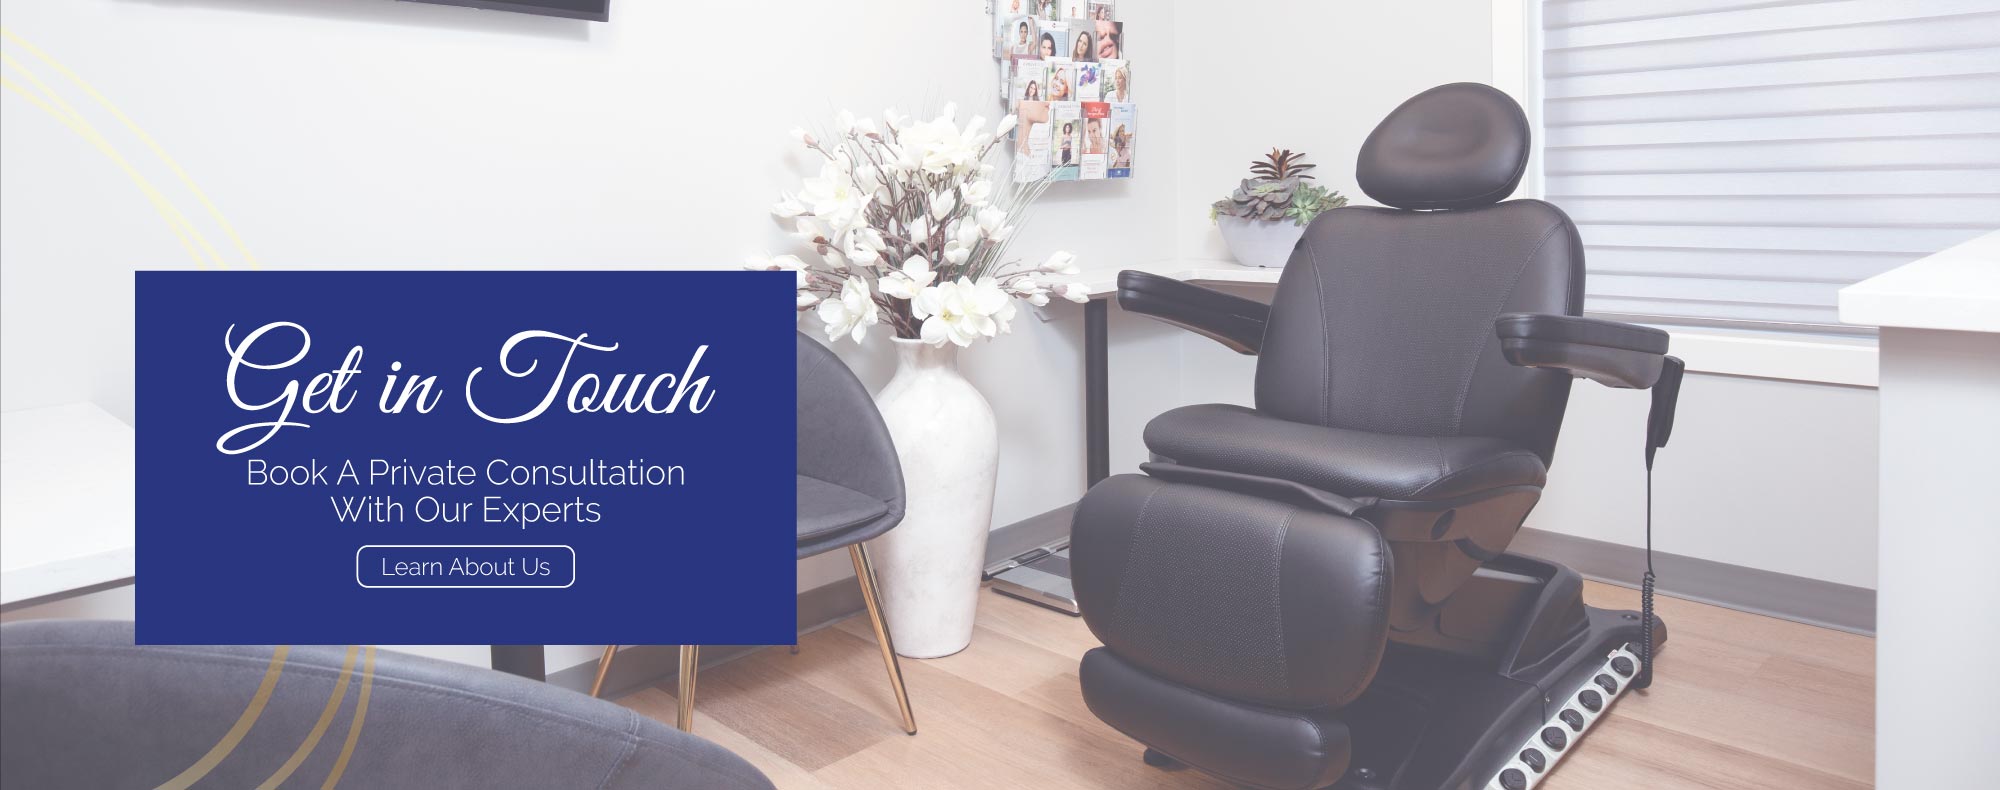 Book a private consultation with the experts at Captivating Aesthetics, Grande Prairie